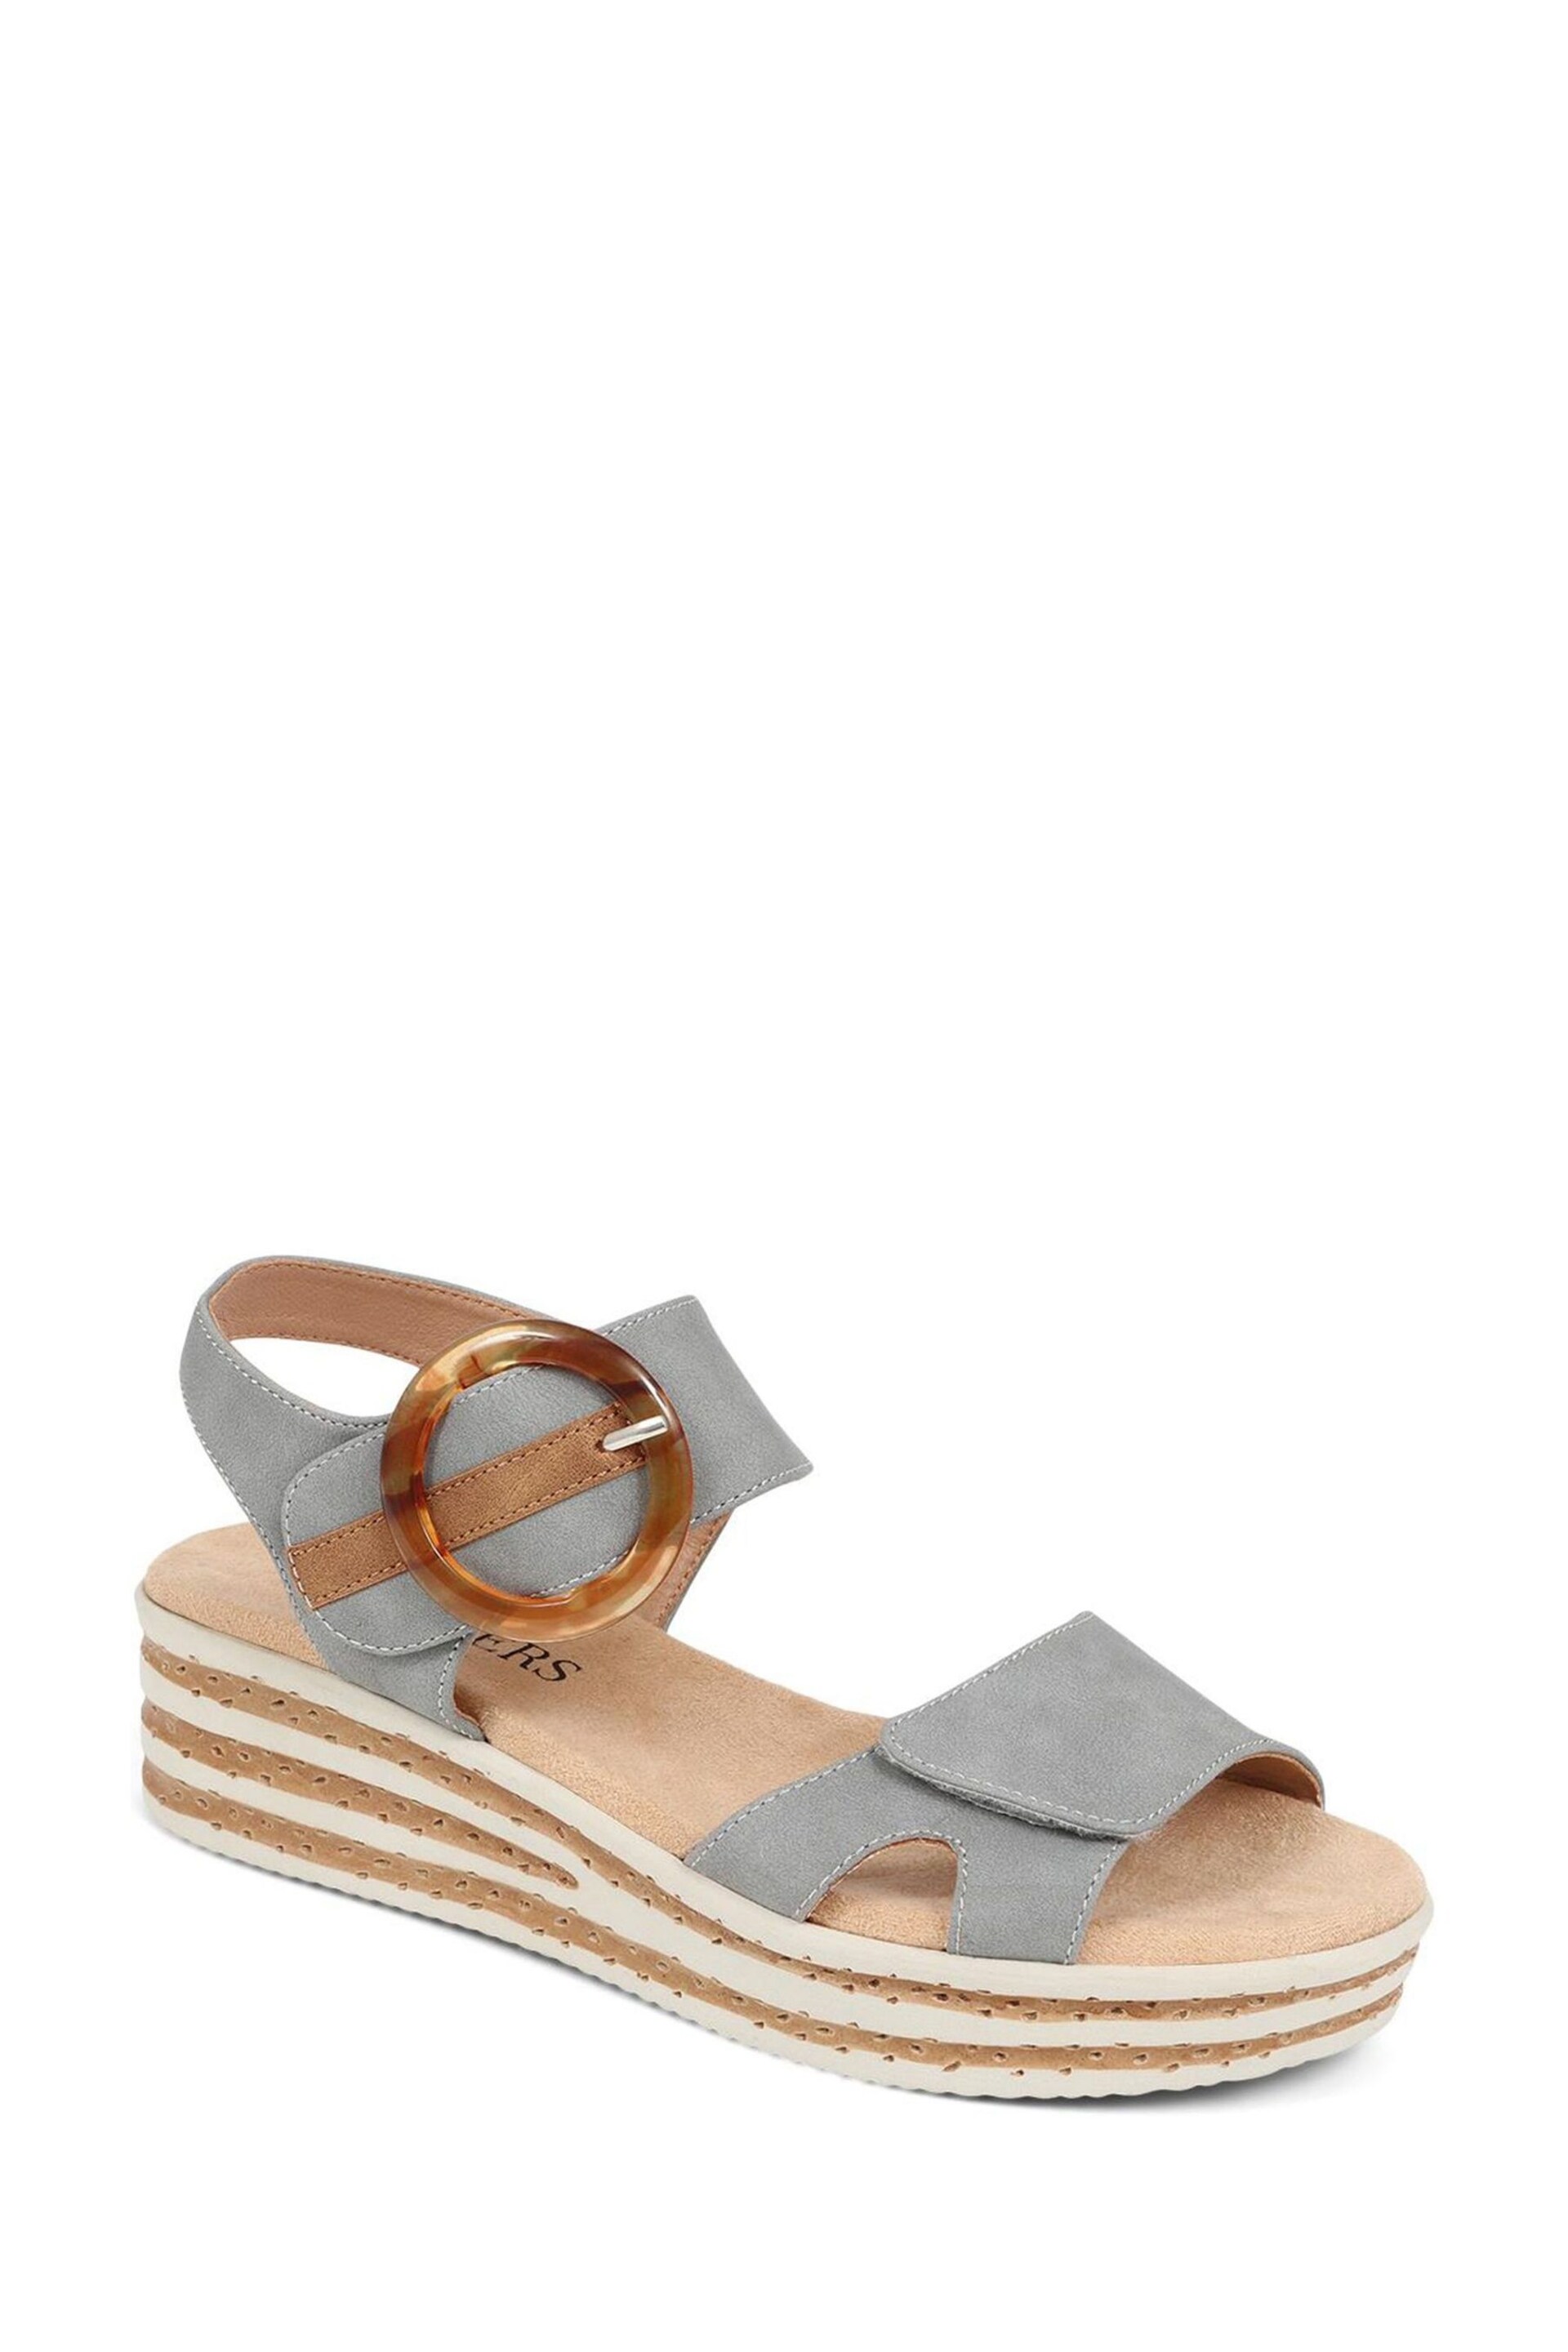 Pavers Blue Touch Fasten Wedge Sandals - Image 2 of 5